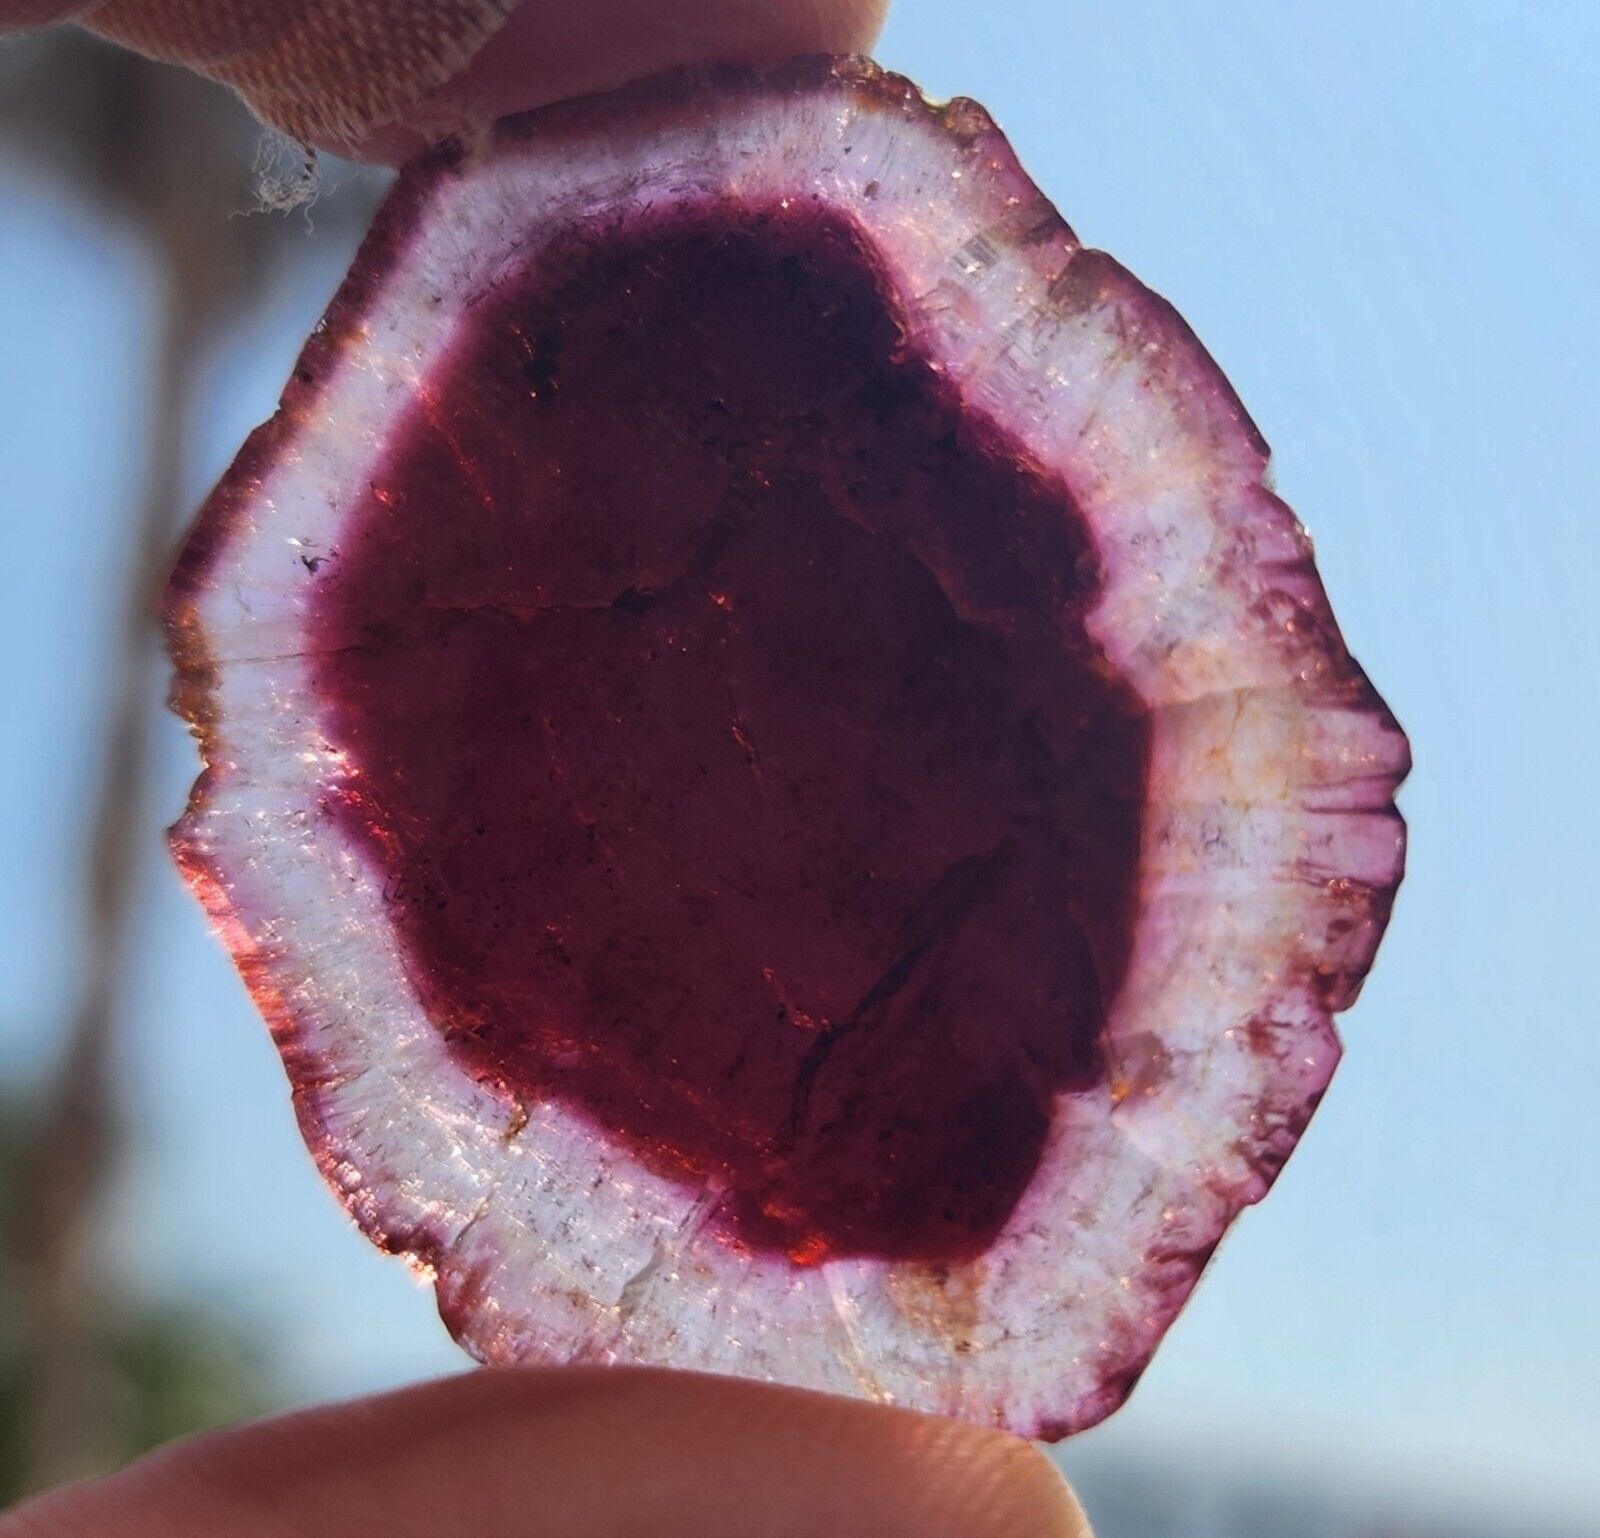 Cranberry Intense Red WATERMELON TOURMALINE Slice From Malkan Russia 16.3 Grs #2